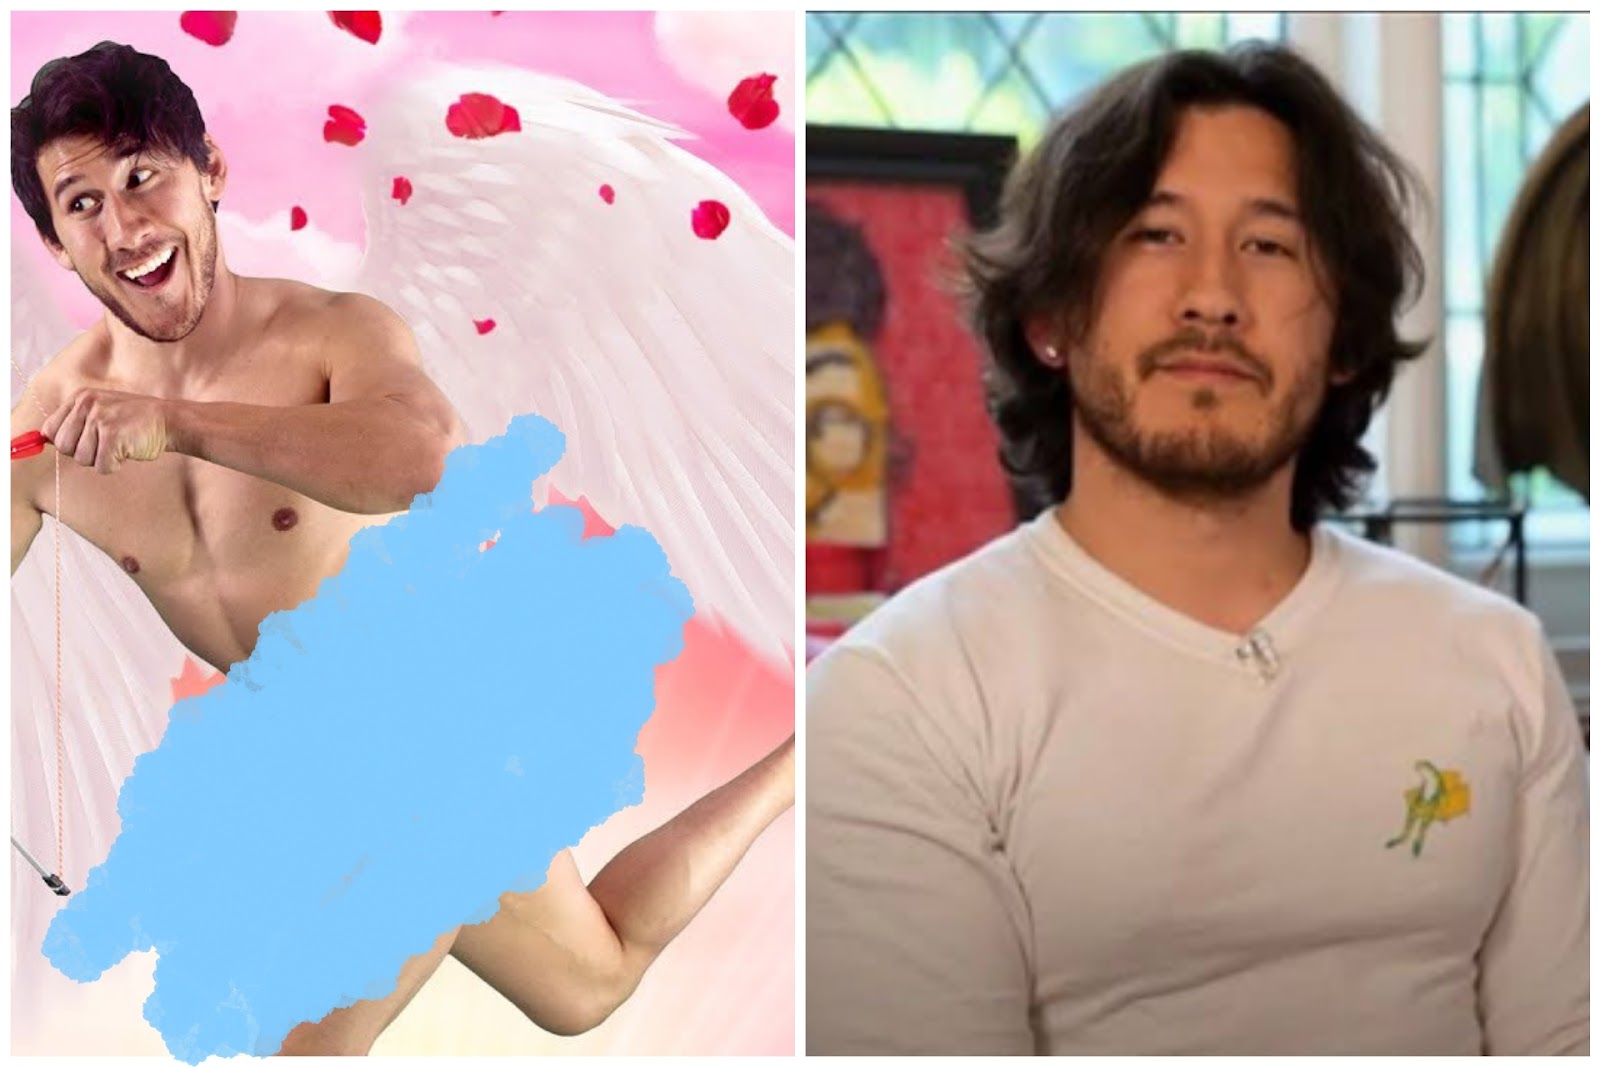 How Much Money Did Markiplier Make From His Onlyfans